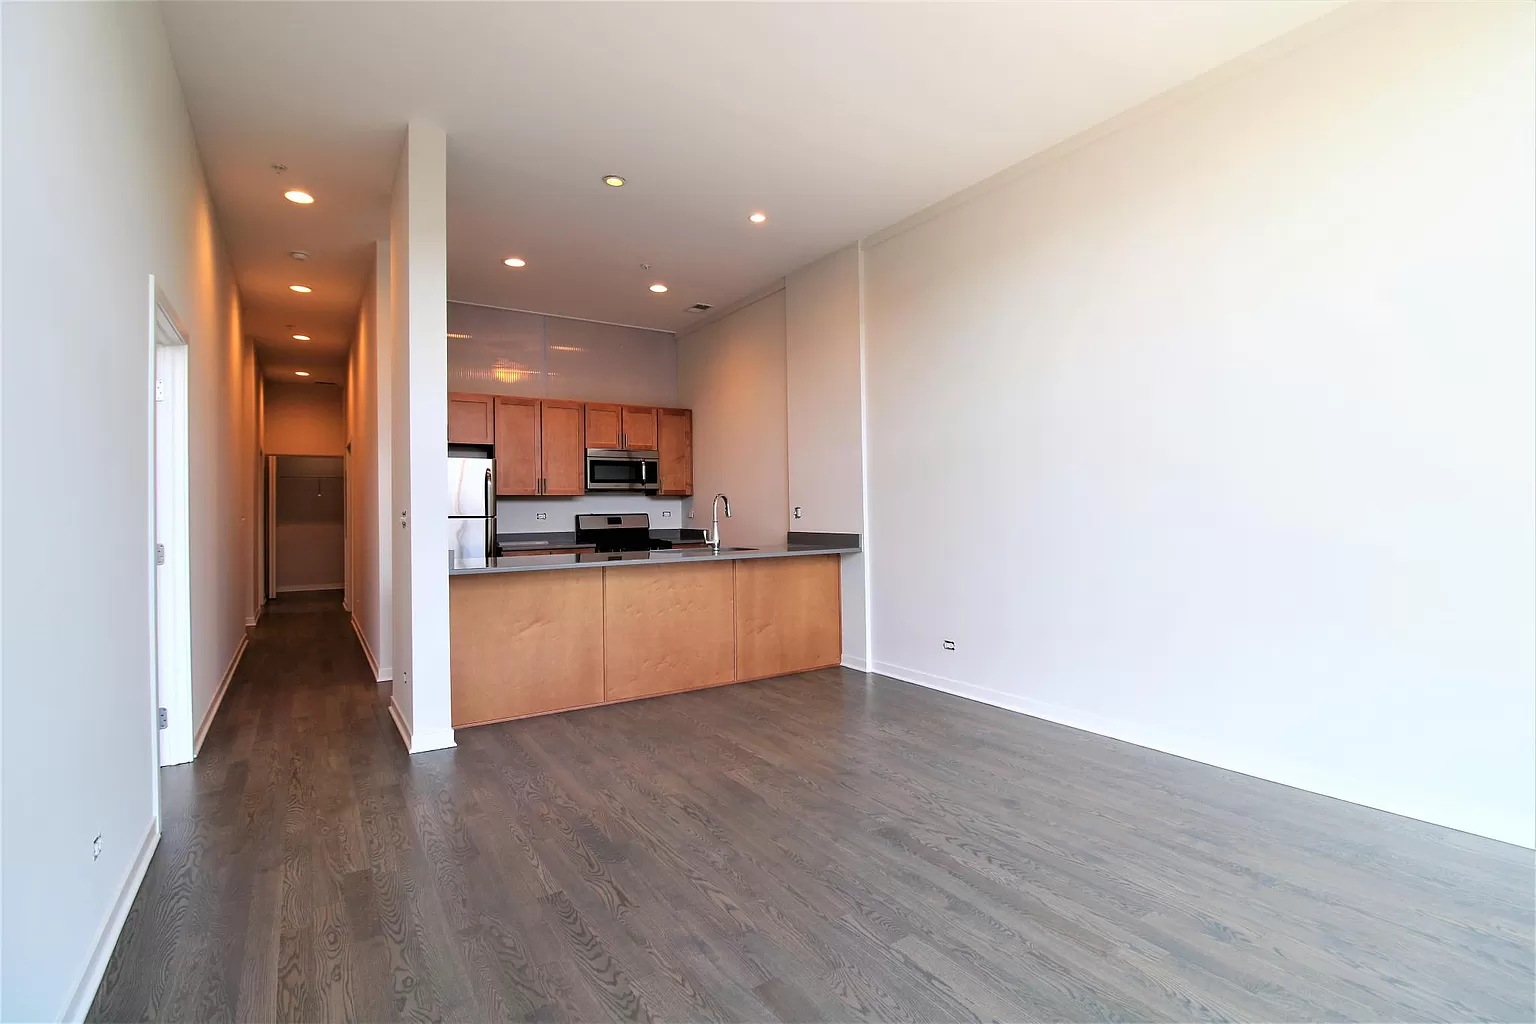 Apartments Near National Latino Education Institute 2.5 Bed 2 bath apartment - Available for lease takeover or looking for a room mate for National Latino Education Institute Students in Chicago, IL